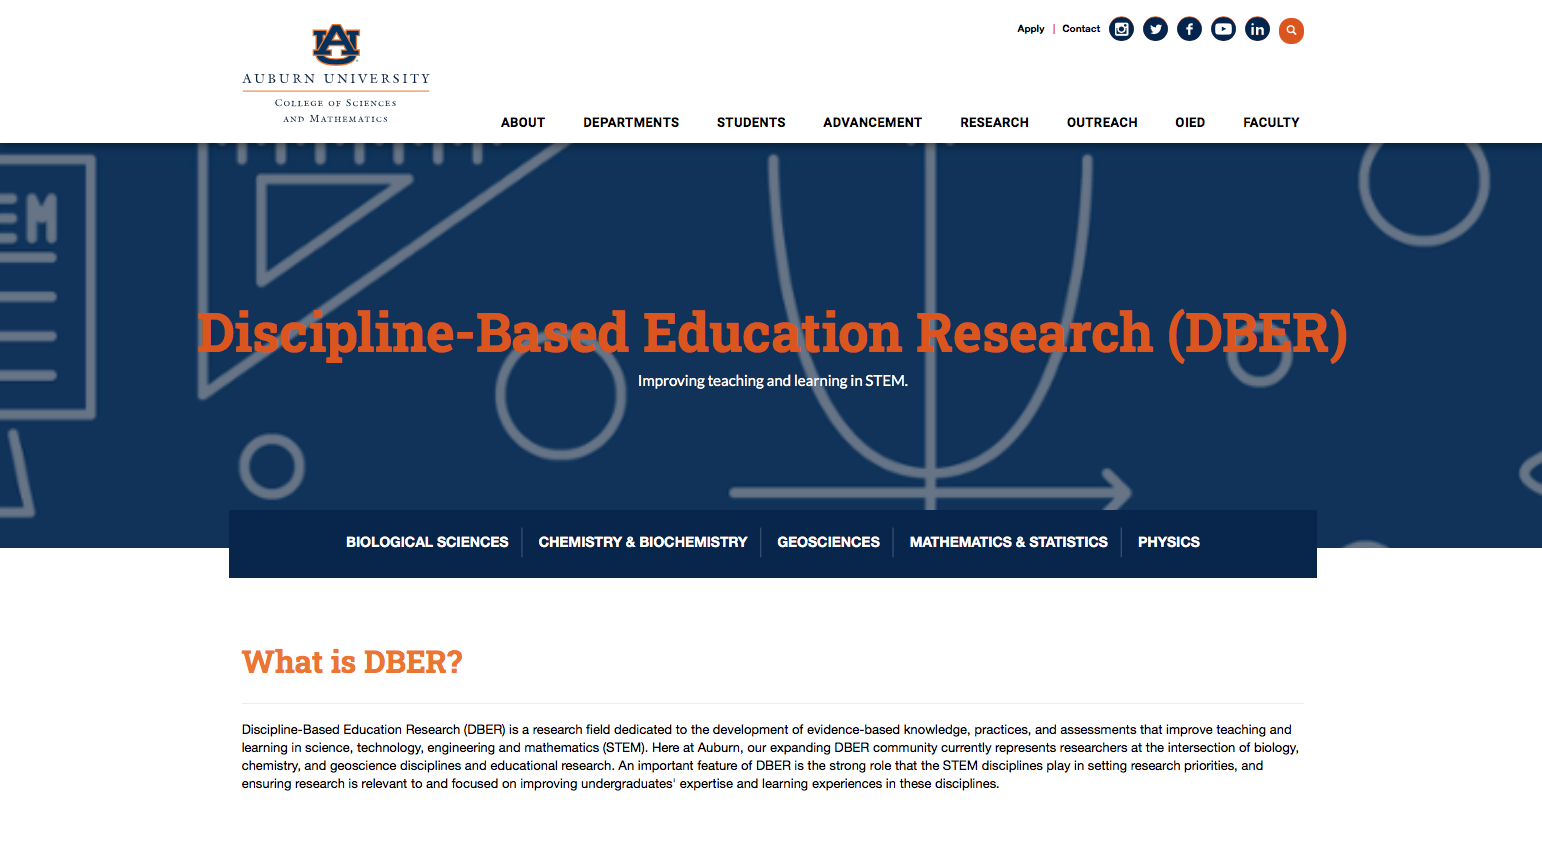 COSAM Discipline-Based Education Research cluster seeks to investigate and improve learning